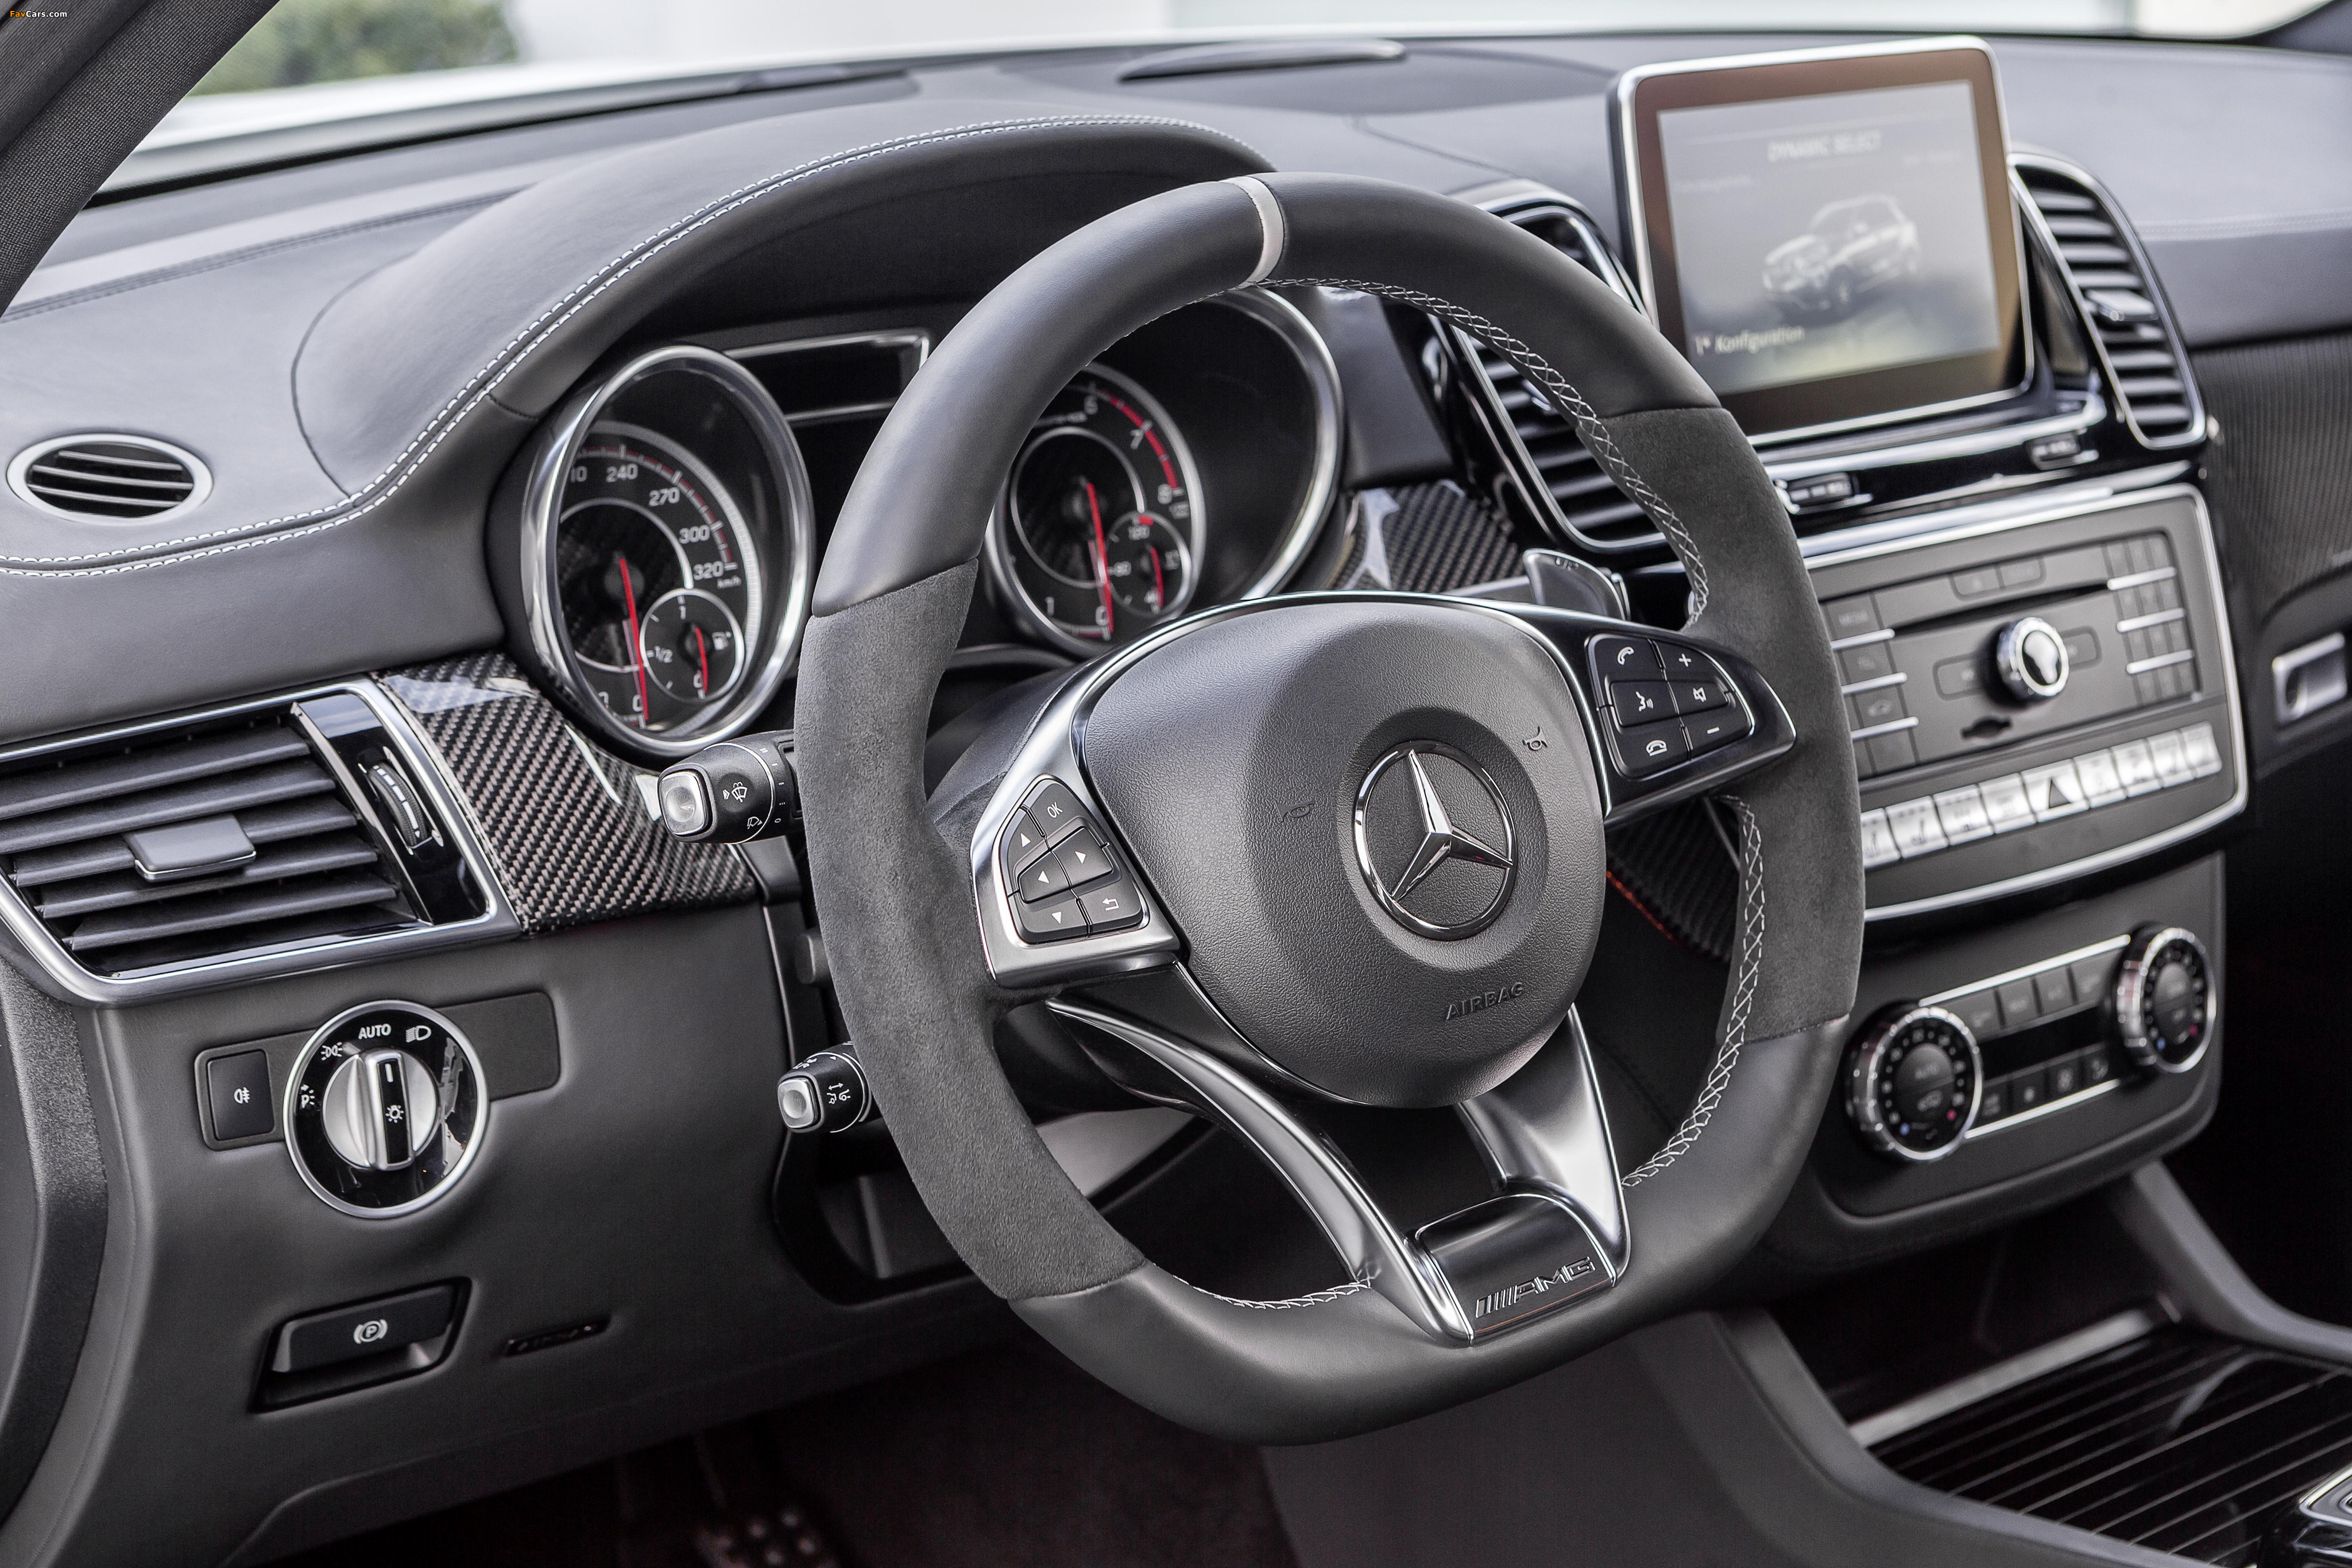 Mercedes-AMG GLE 63 S 4MATIC (W166) 2015 pictures (4096 x 2731)